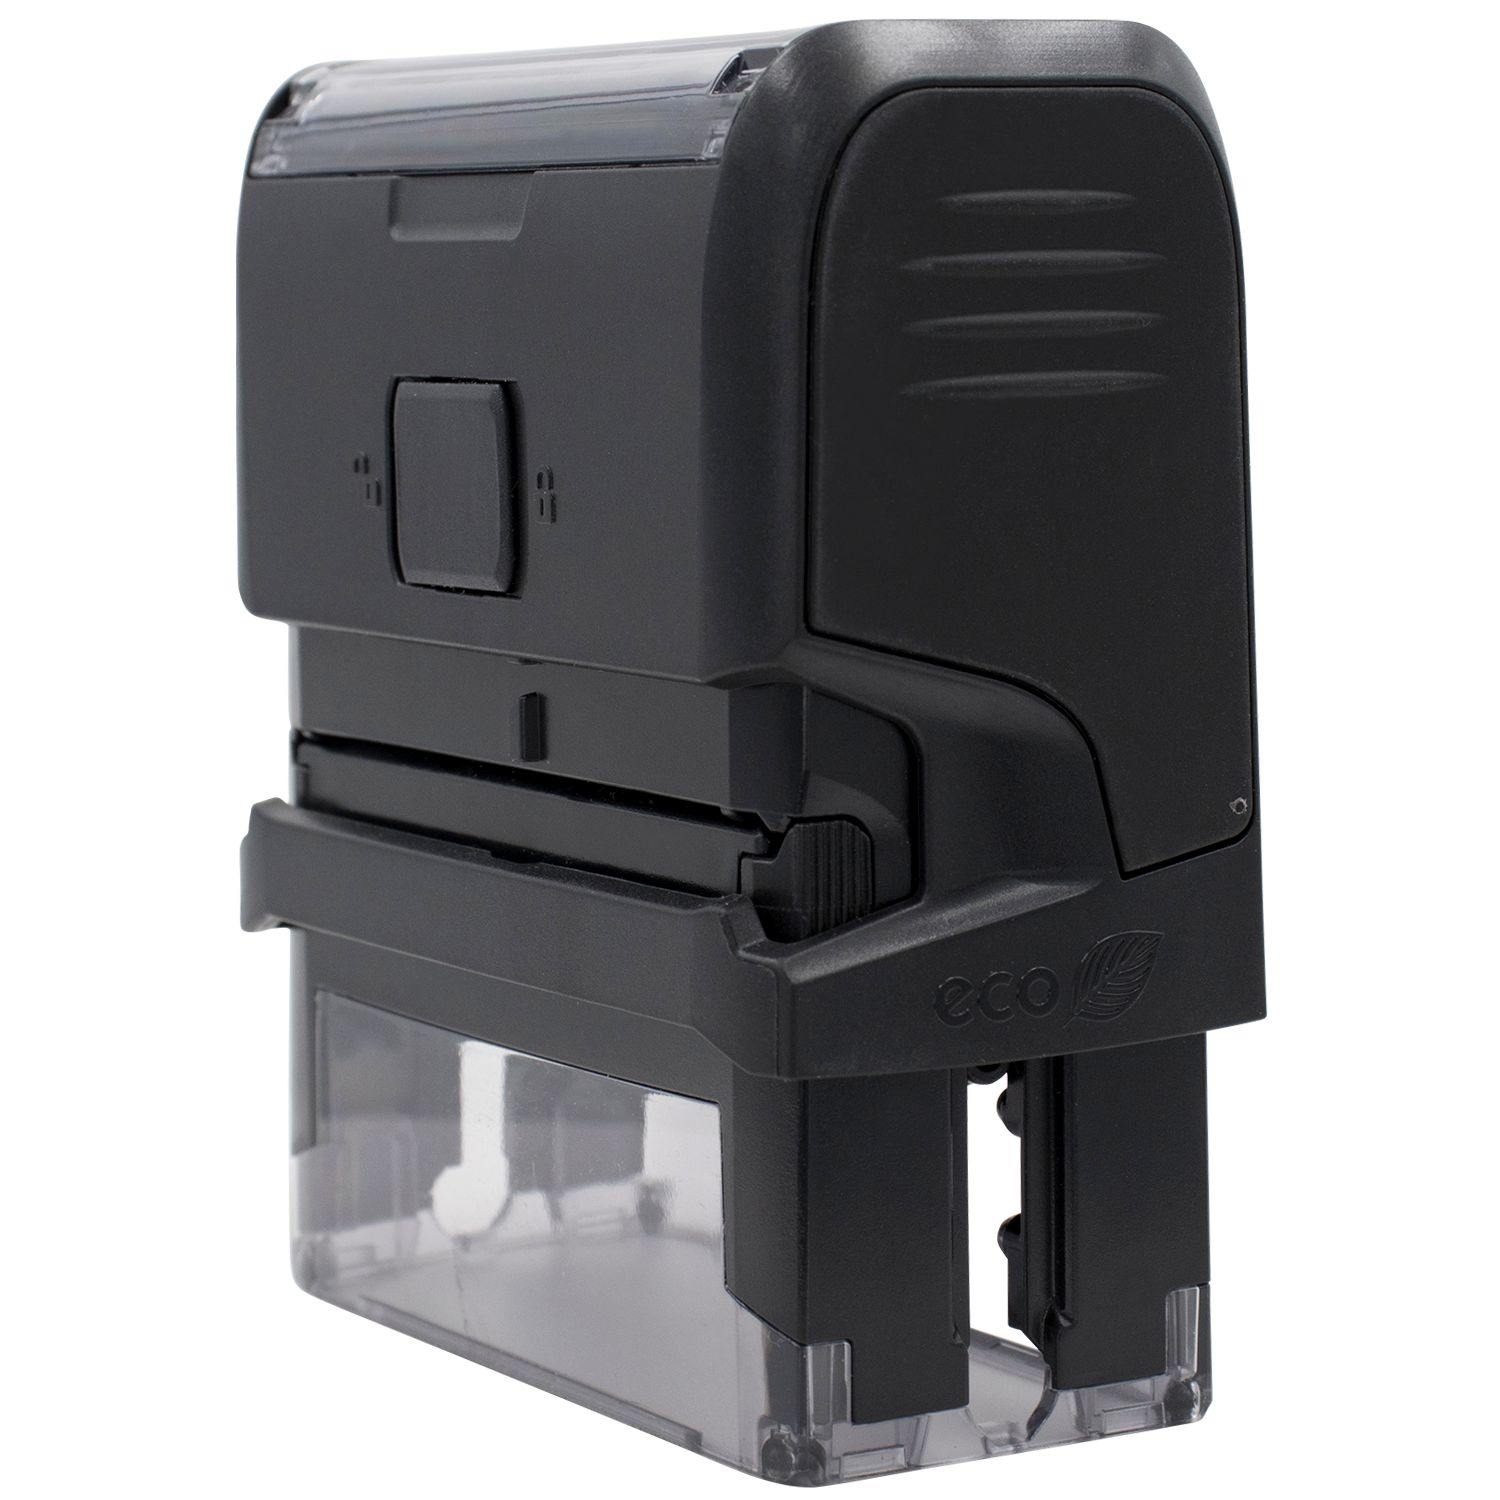 Large Self-Inking Spoiled Stamp - Engineer Seal Stamps - Brand_Trodat, Impression Size_Large, Stamp Type_Self-Inking Stamp, Type of Use_Business, Type of Use_General